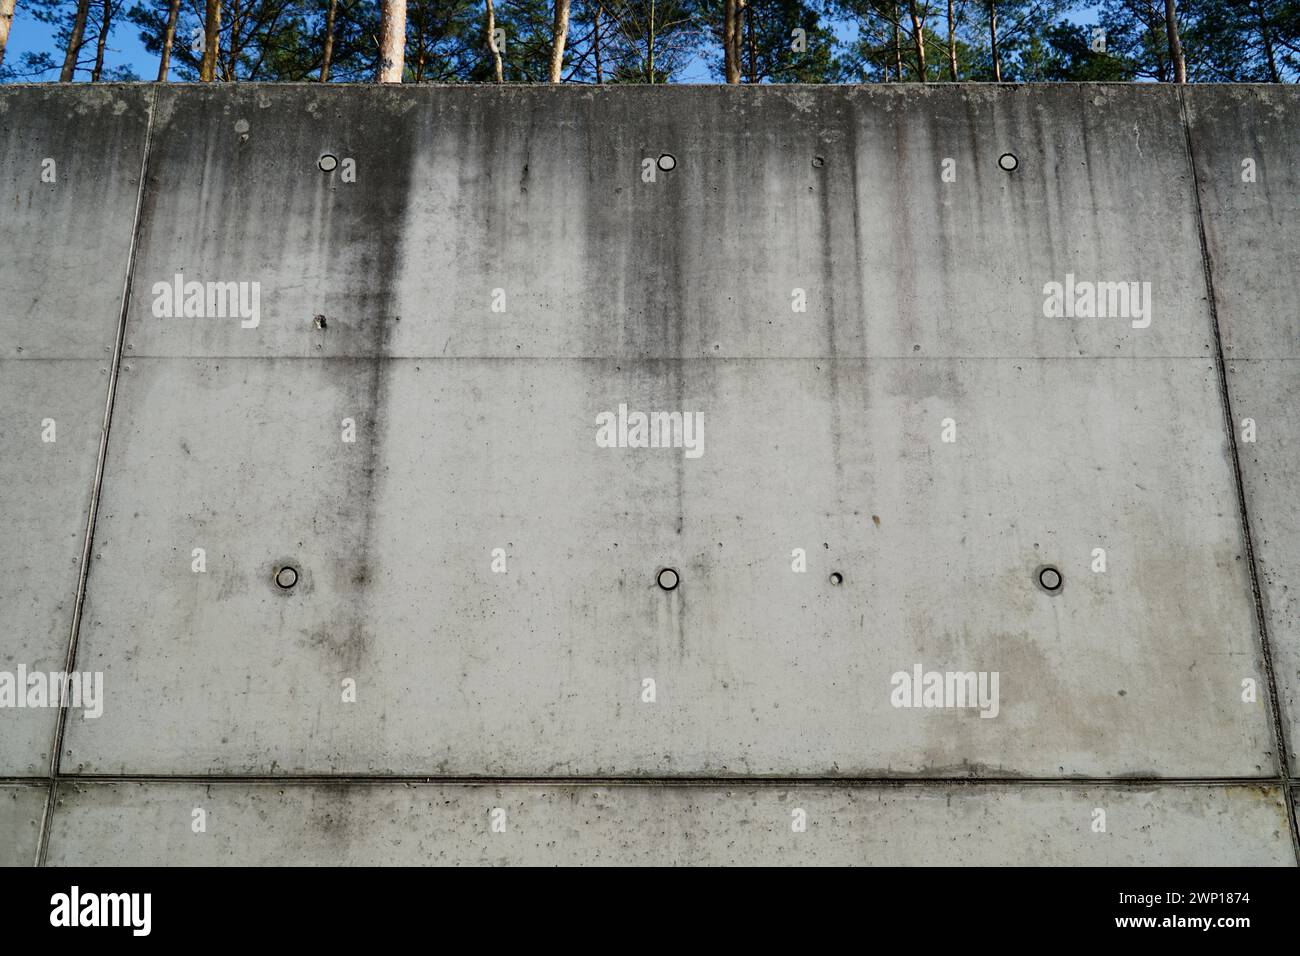 Concrete wall with round wholes Stock Photo